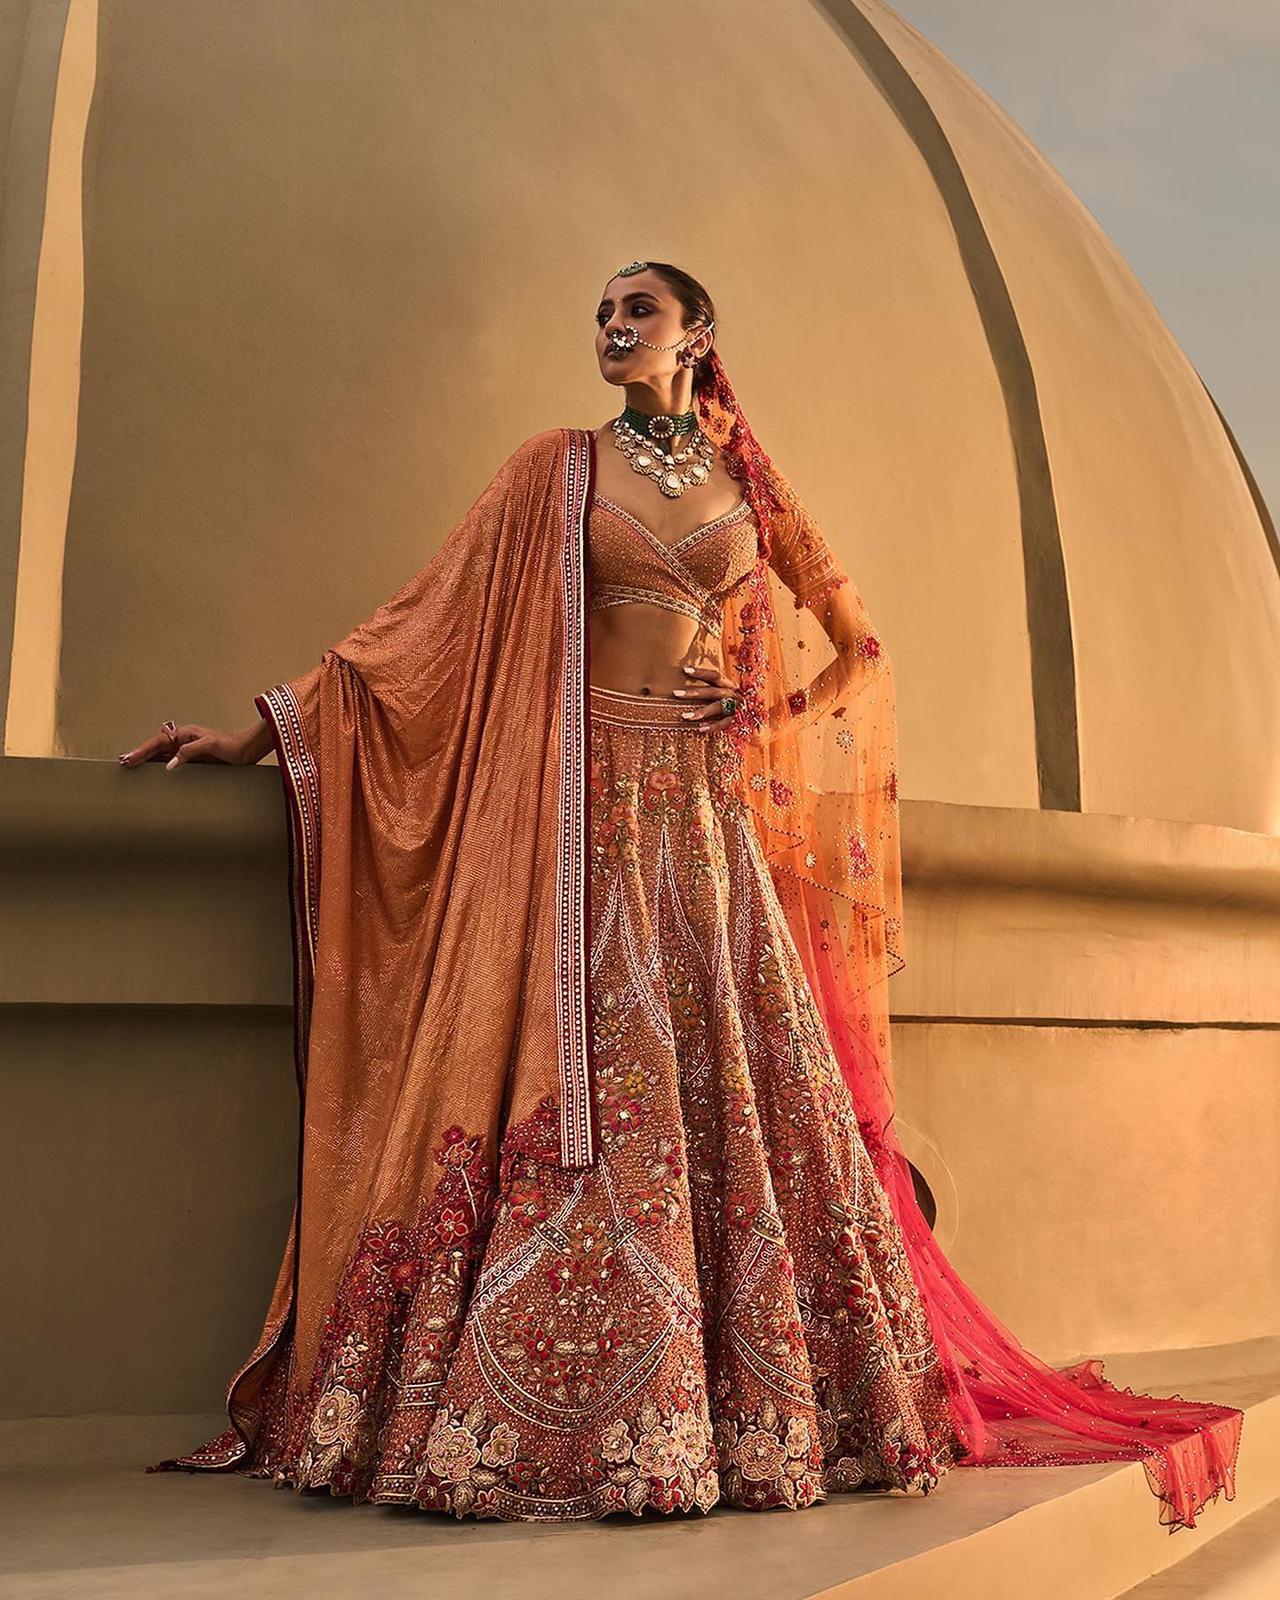 What Traditional Indian Wedding Outfits Do Male And Female Guests Wear?